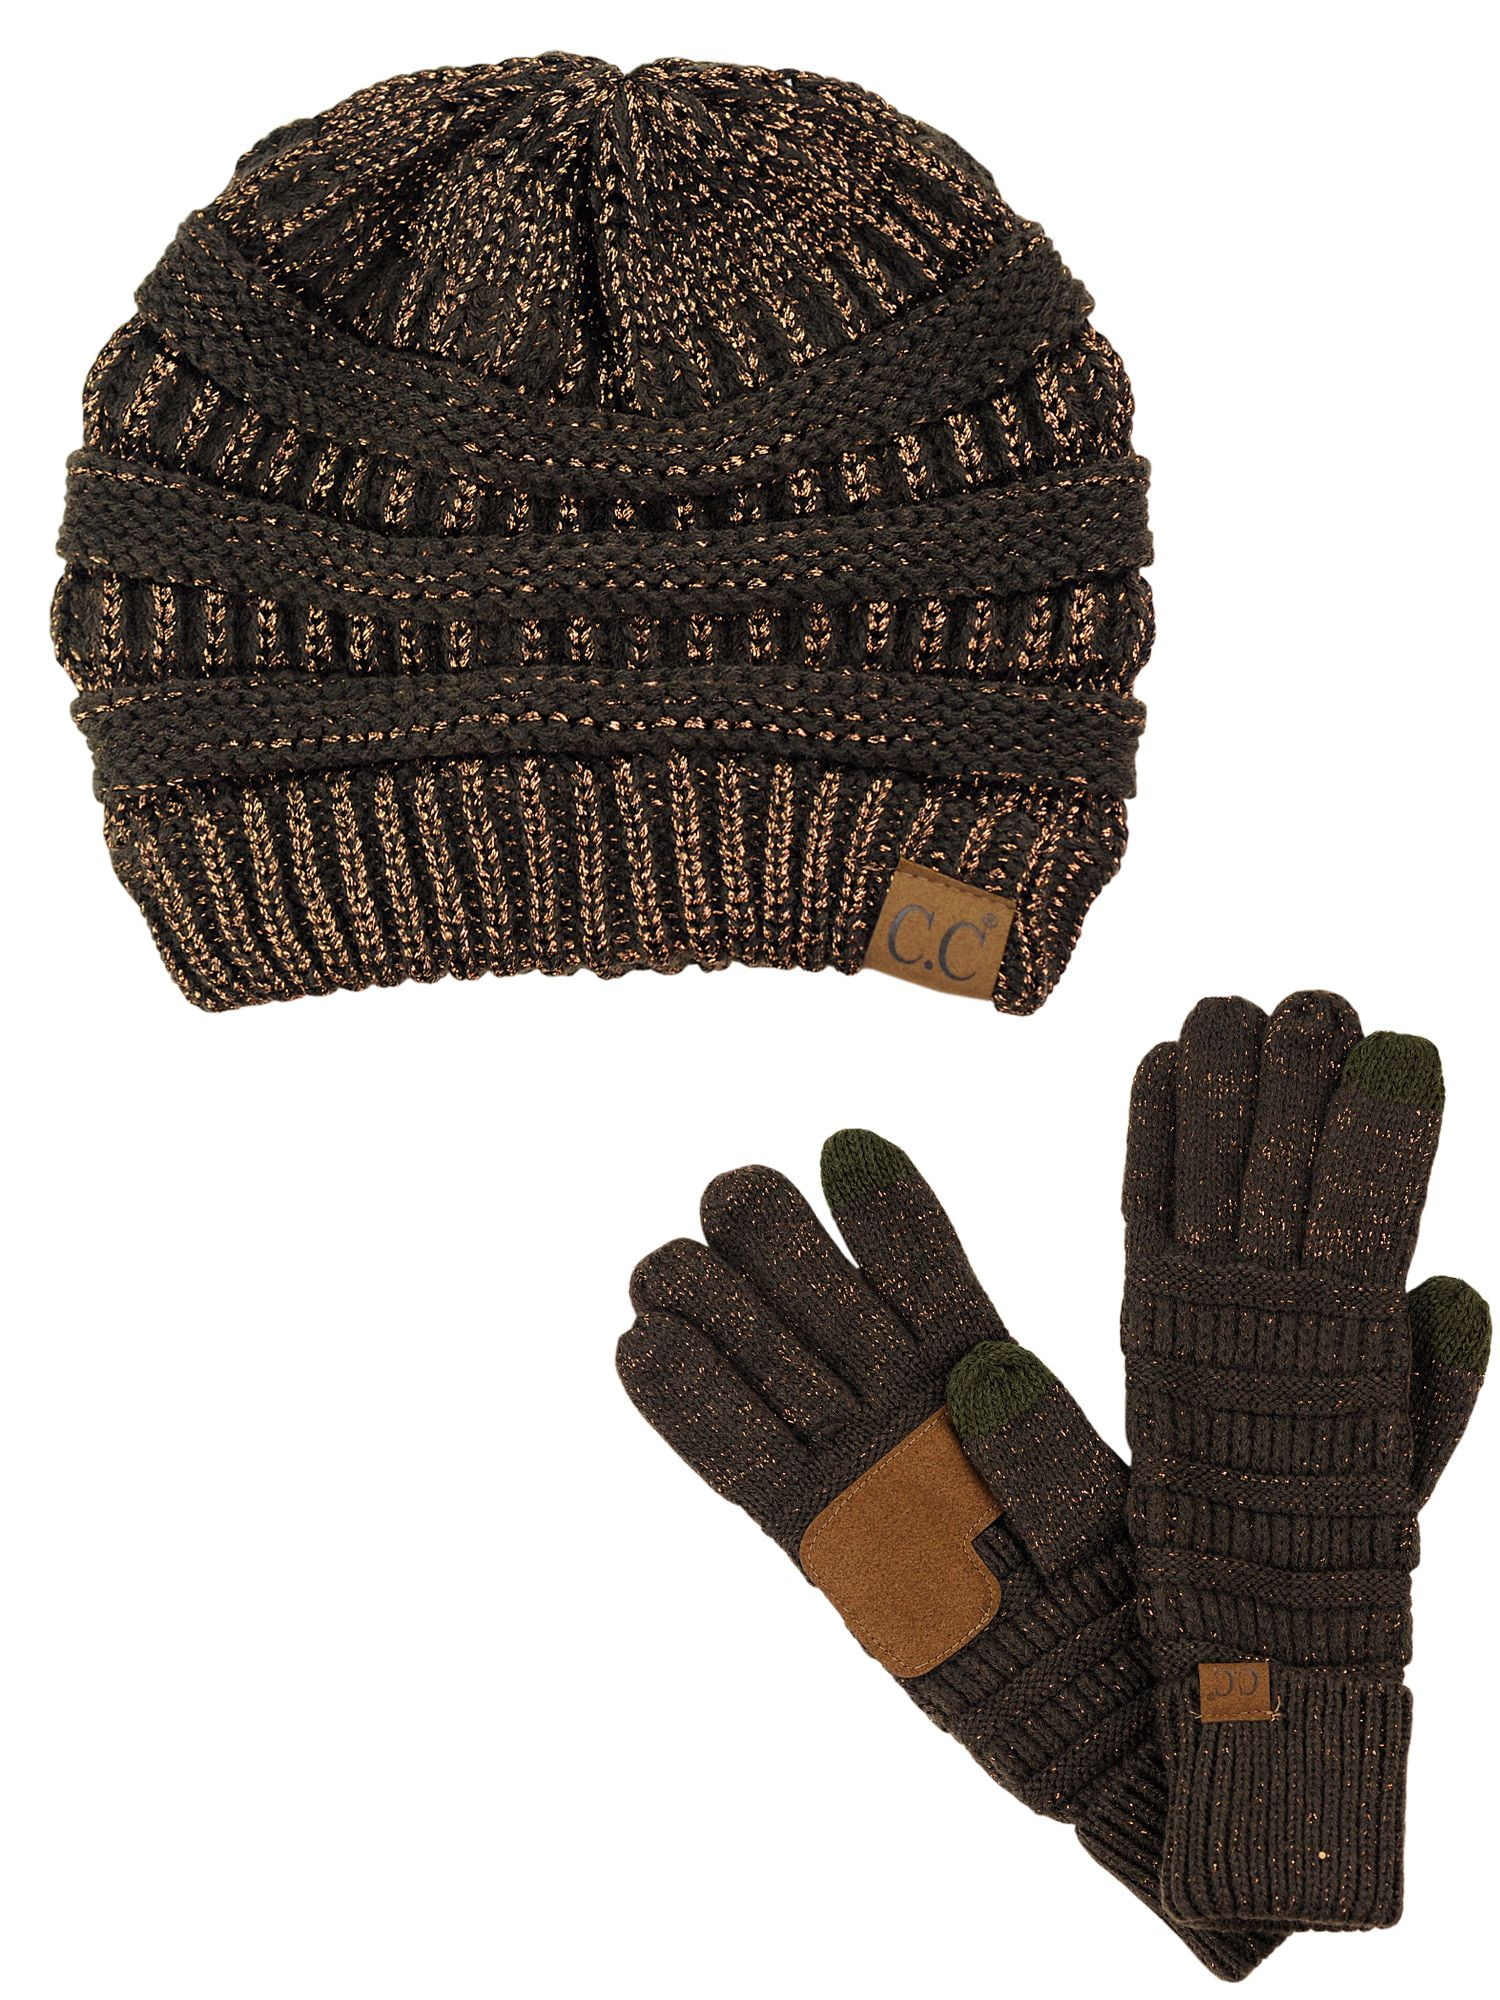 NEW TAUPE THERMAL KNITTED WINTER STRETCH GLOVES WOMENS LADIES LIGHT BROWN 